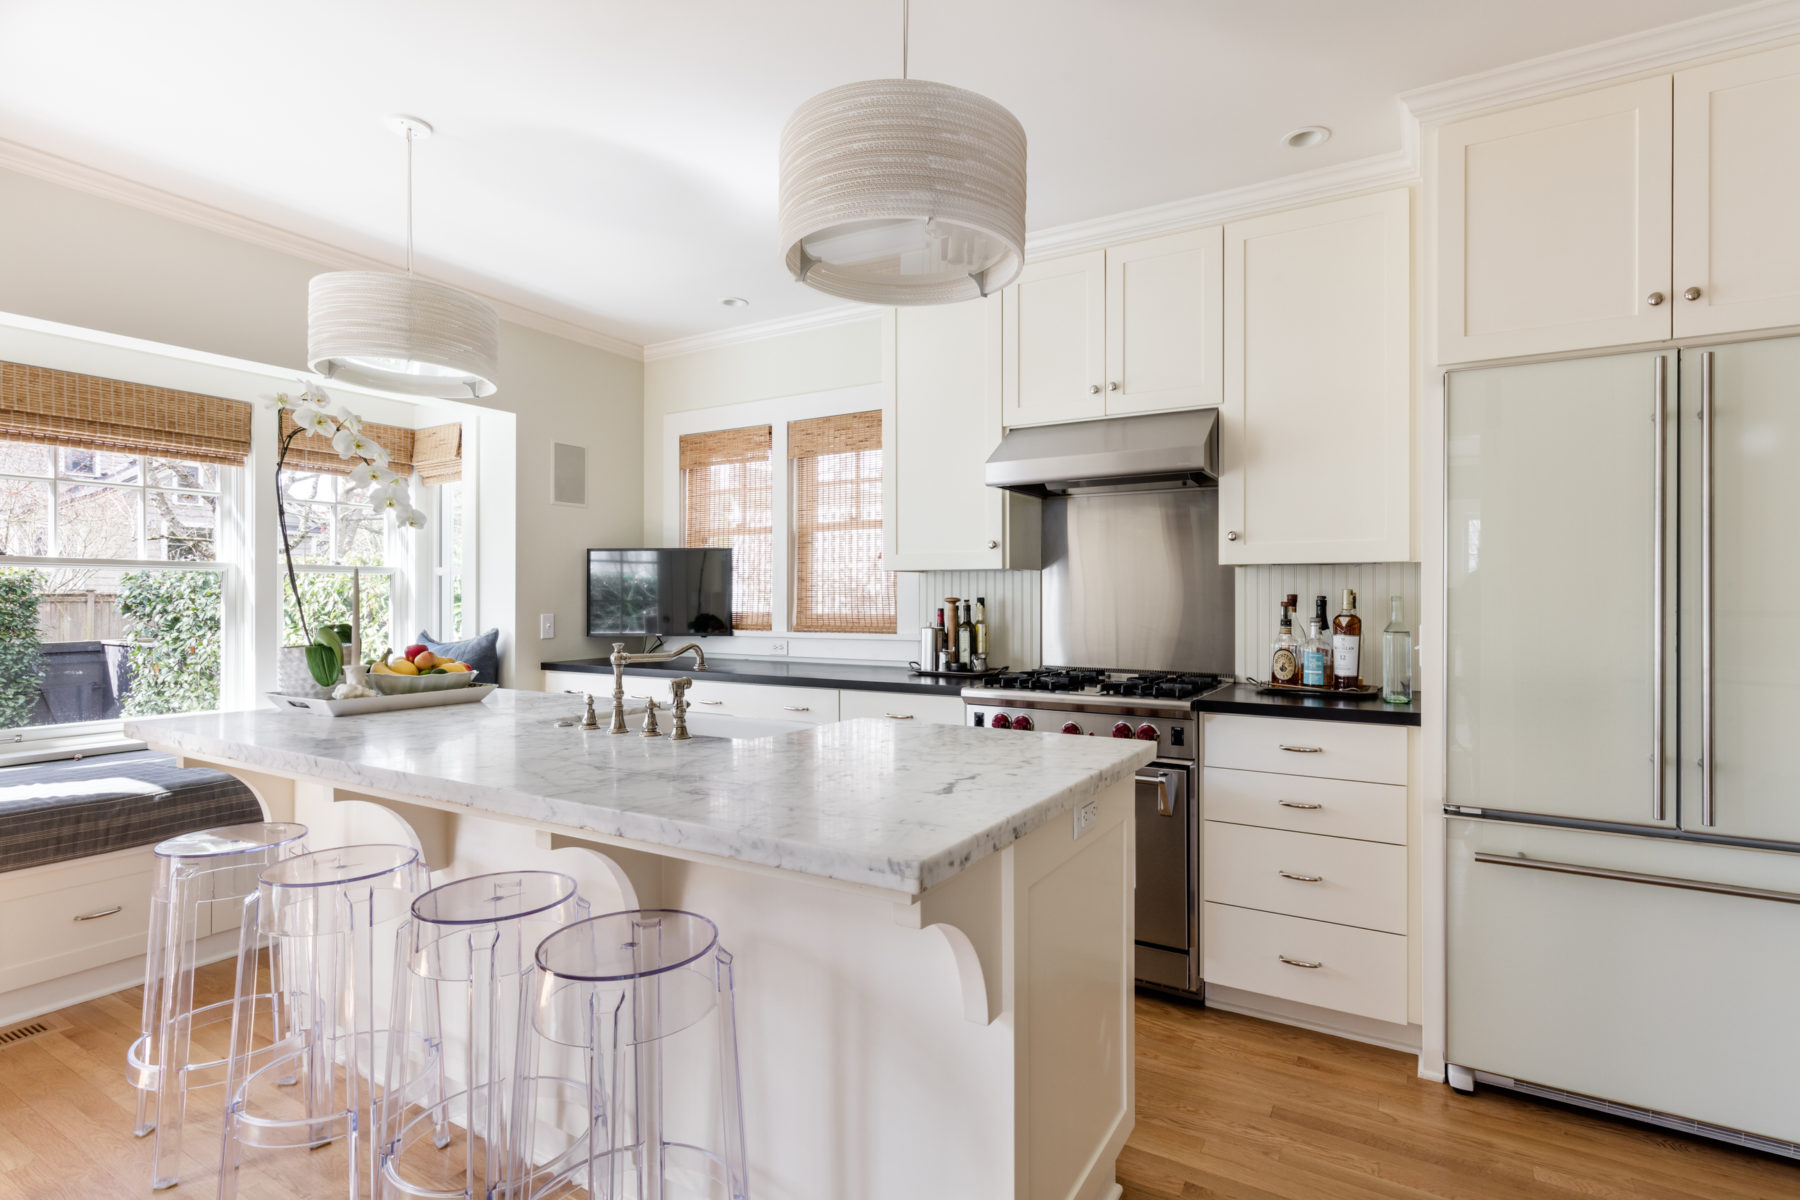 Madrona Colonial Kitchen